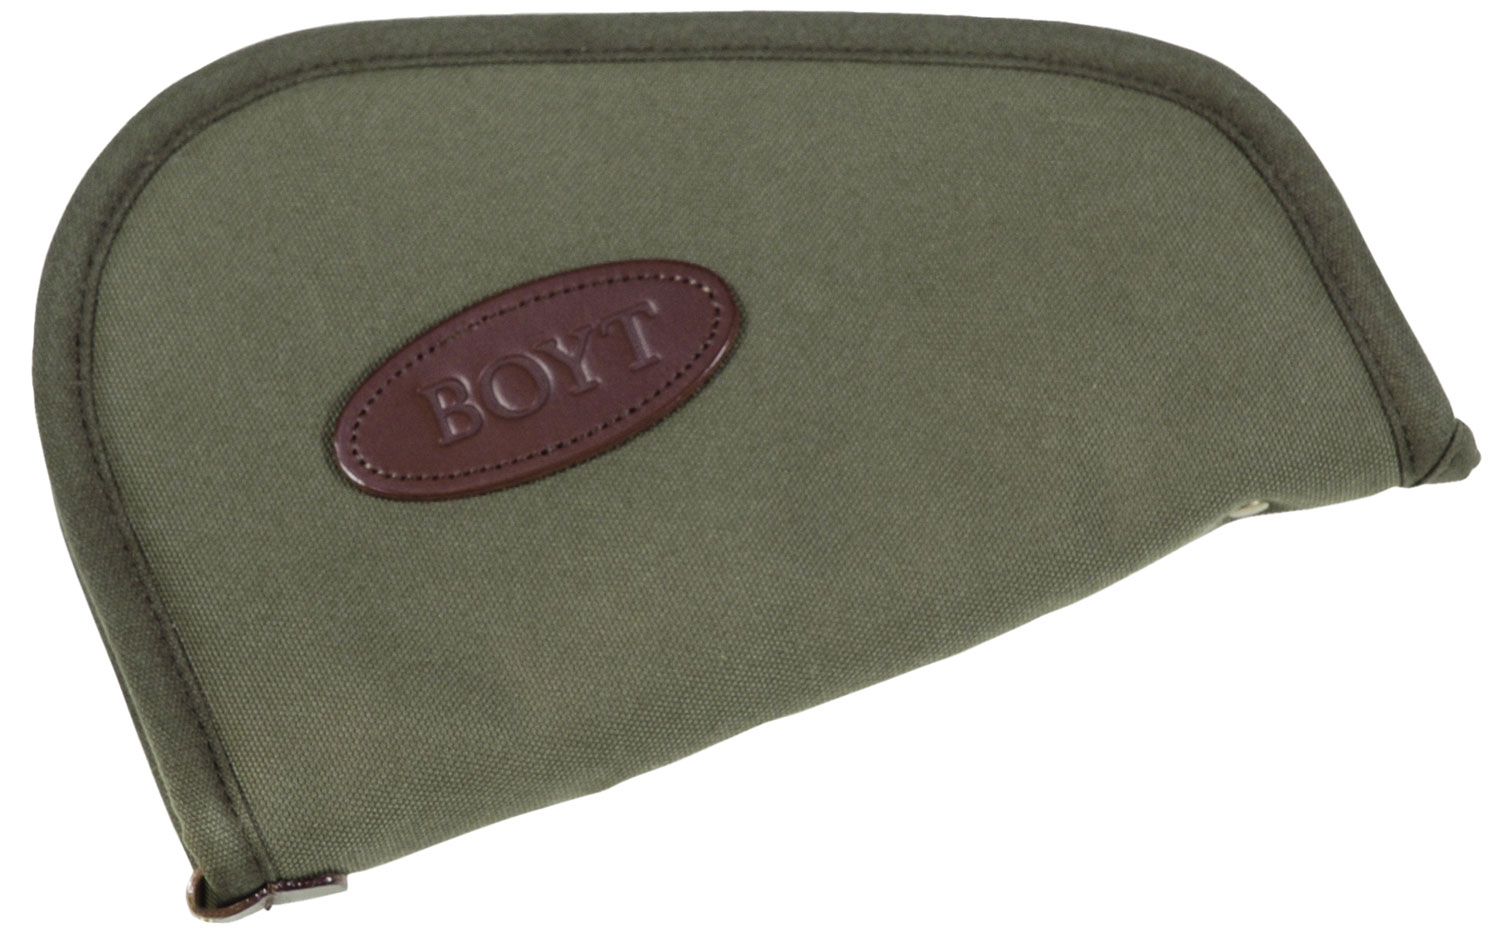 Boyt Harness 0PP620009 Heart-Shaped Pistol Rug made of Waxed Canvas with OD Green Finish, Quilted Flannel Lining, Full Length Zipper & Padding 12